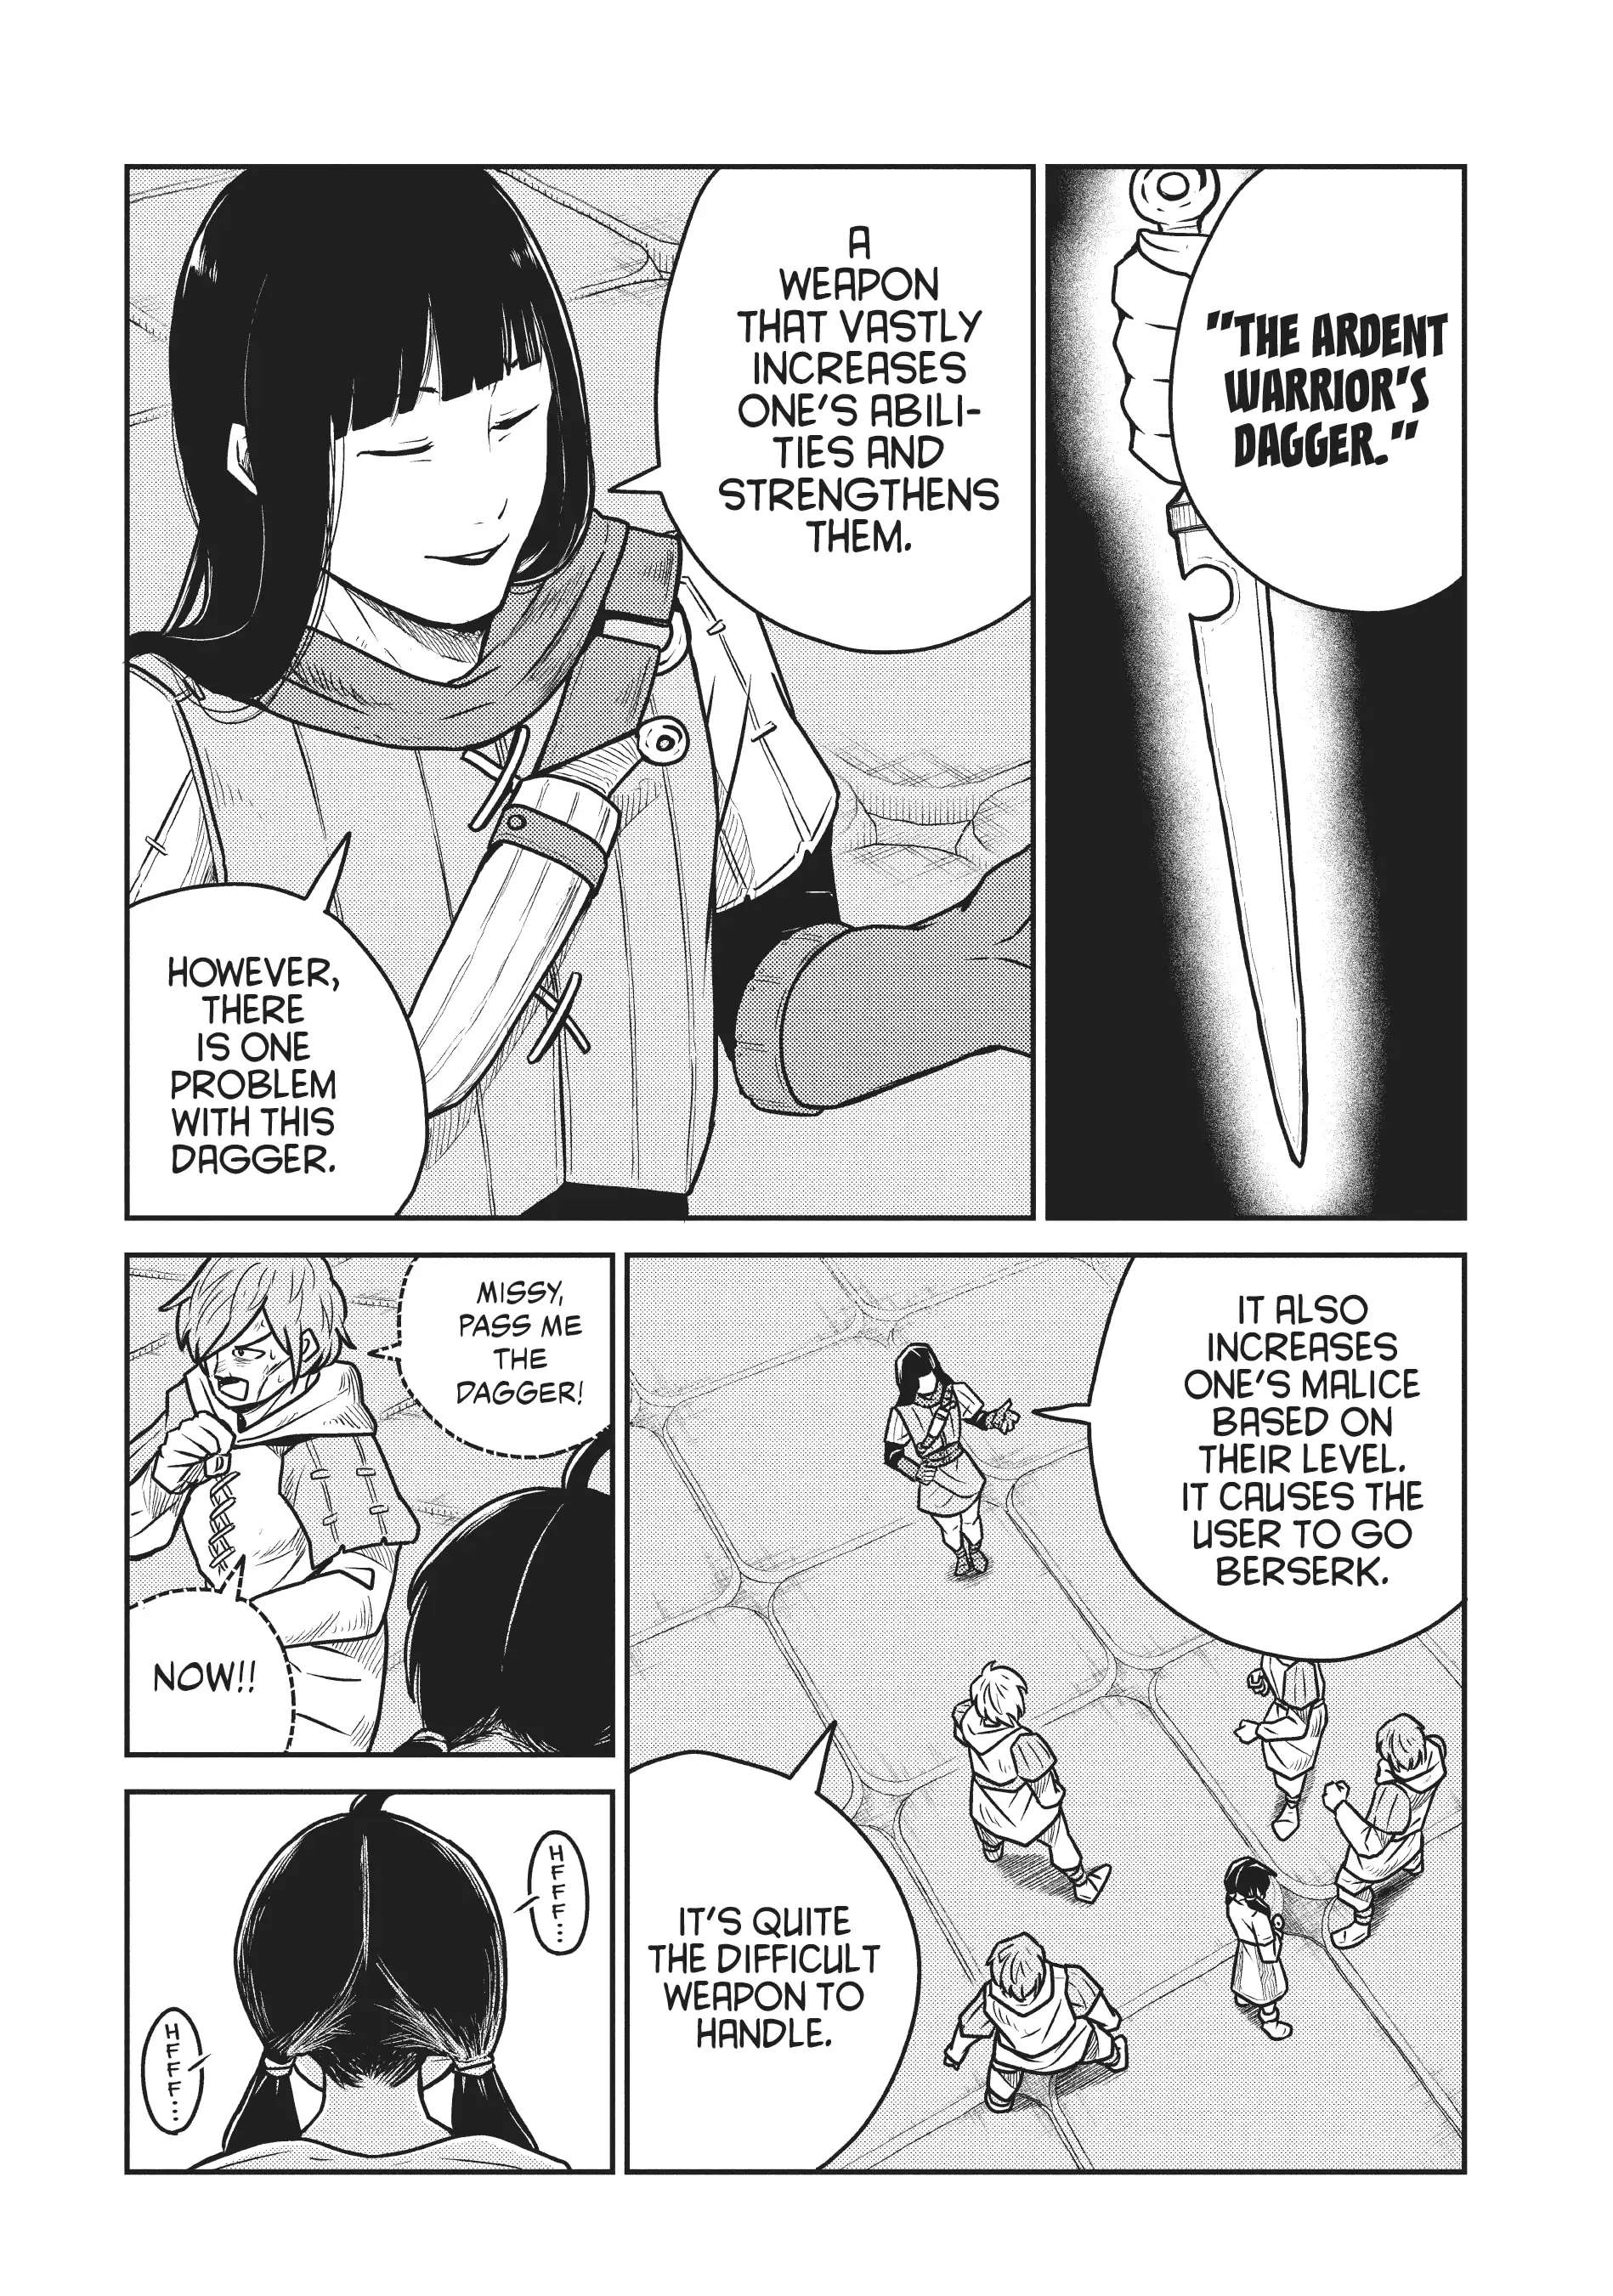 Quality Assurance In Another World - Page 3